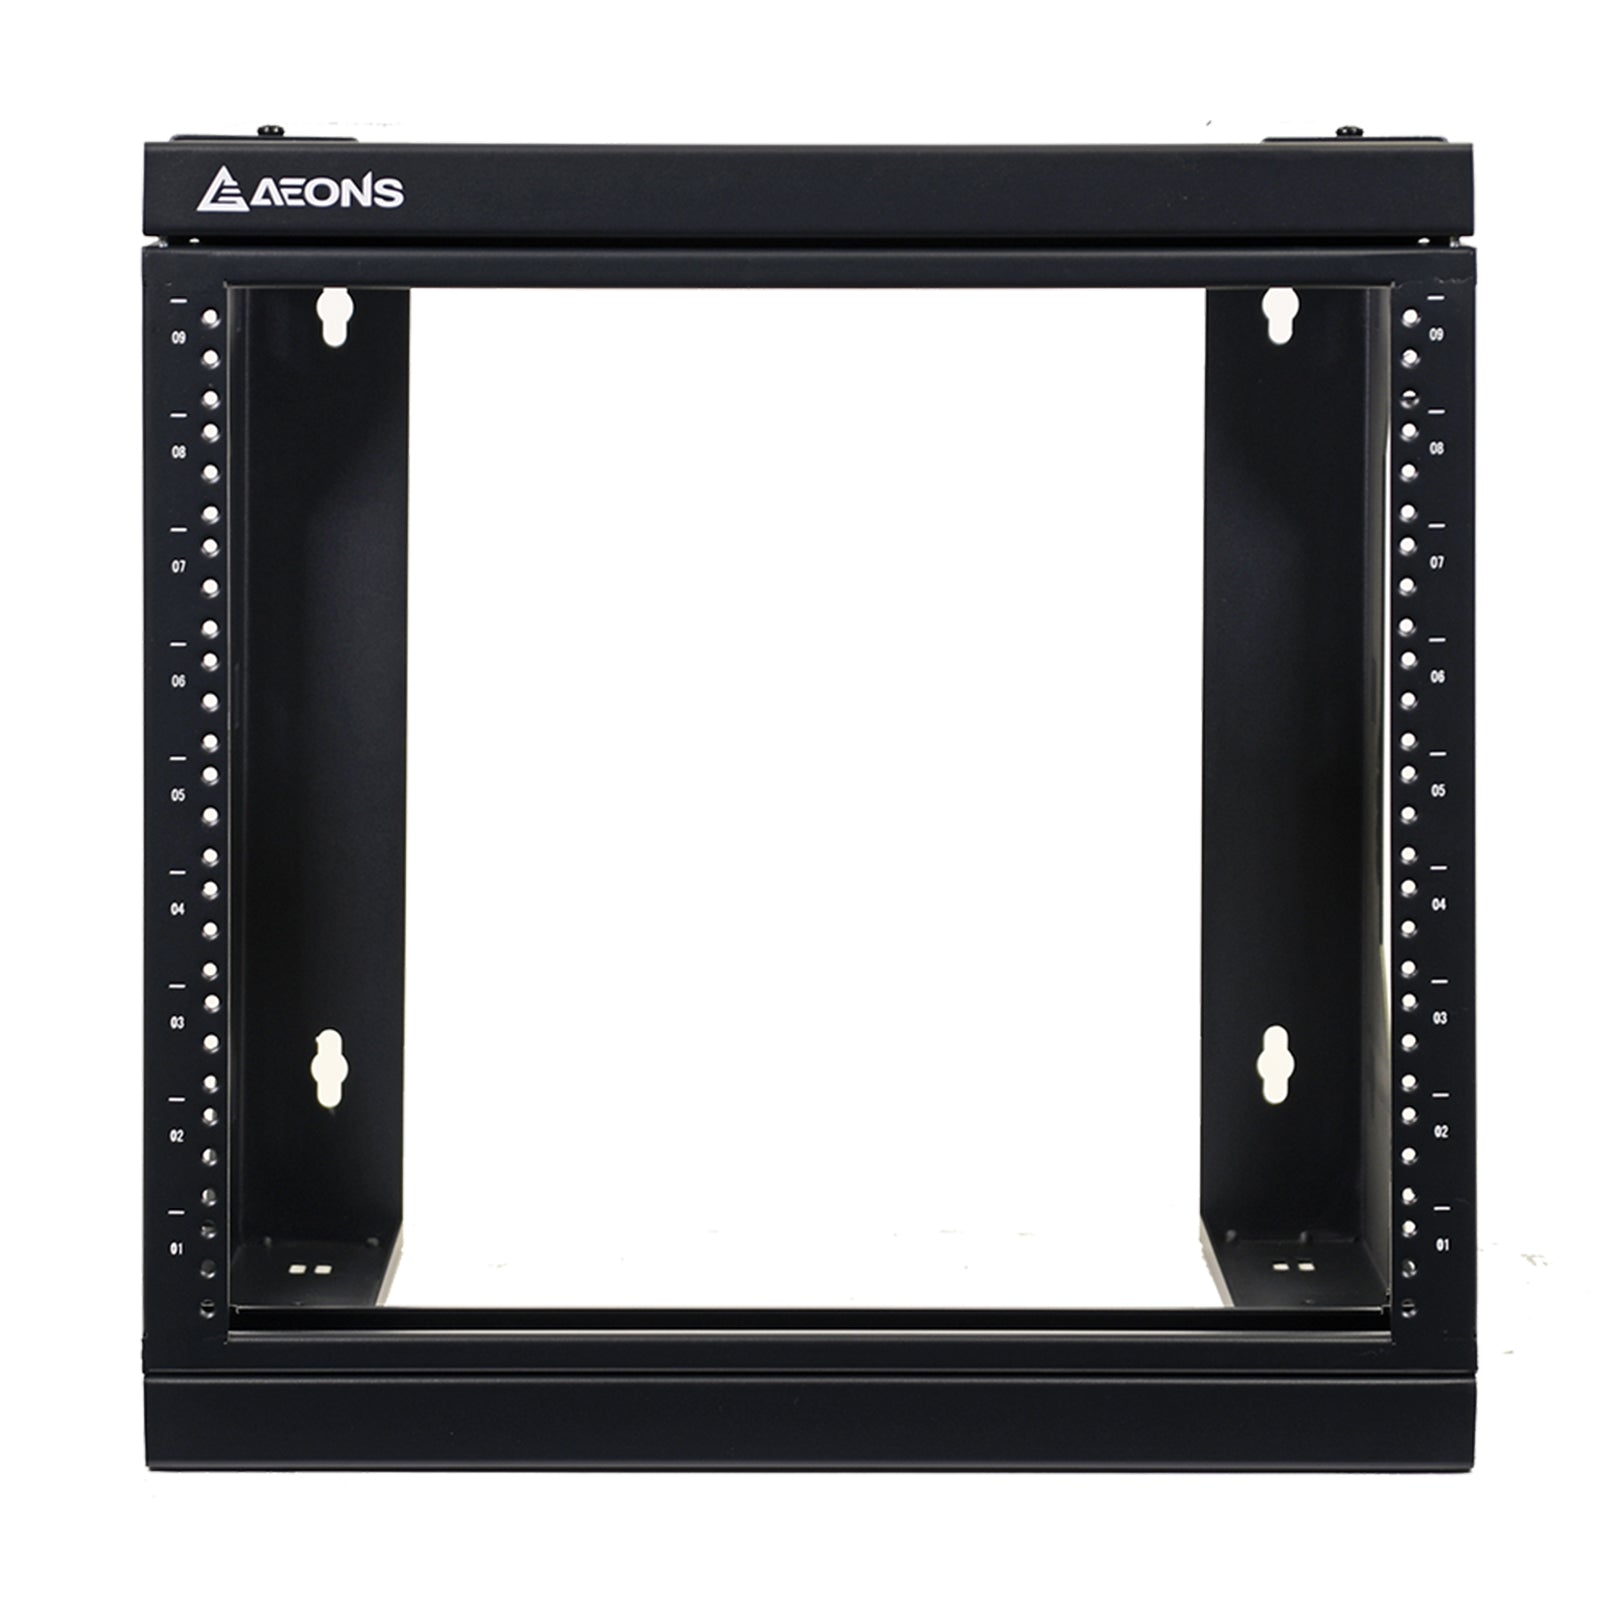 Aeons SBC Seires 6U Wall-Mount Open-Frame Rack, Adjustable-Depth, Swing Out Hinged Gate